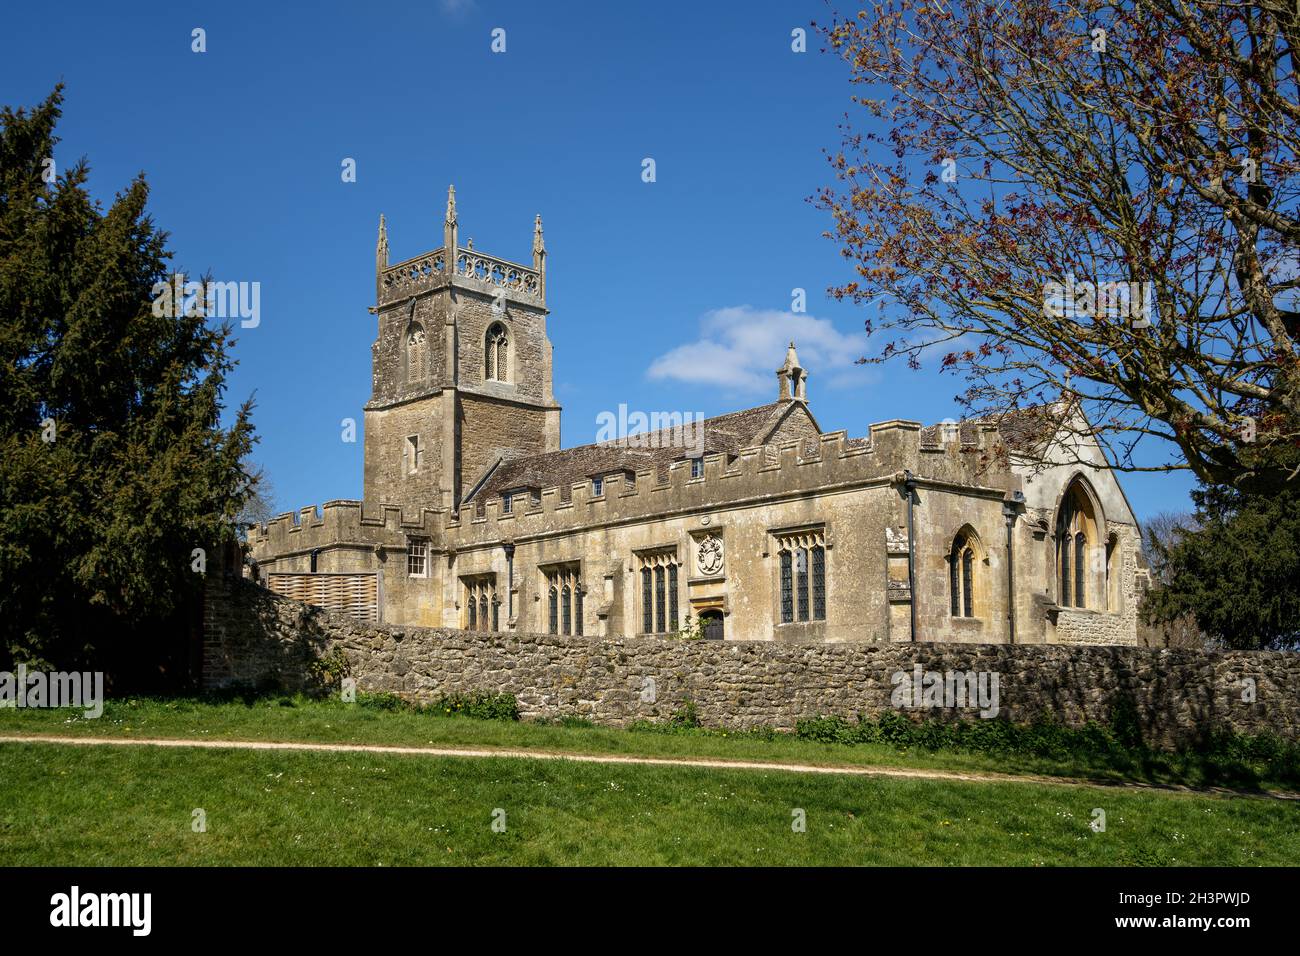 SWINDON, WILTSHIRE, UK -APRIL 25 : View of St Marys church in Lydiard Park near Swindon Wiltshire on April 25, 2021 Stock Photo